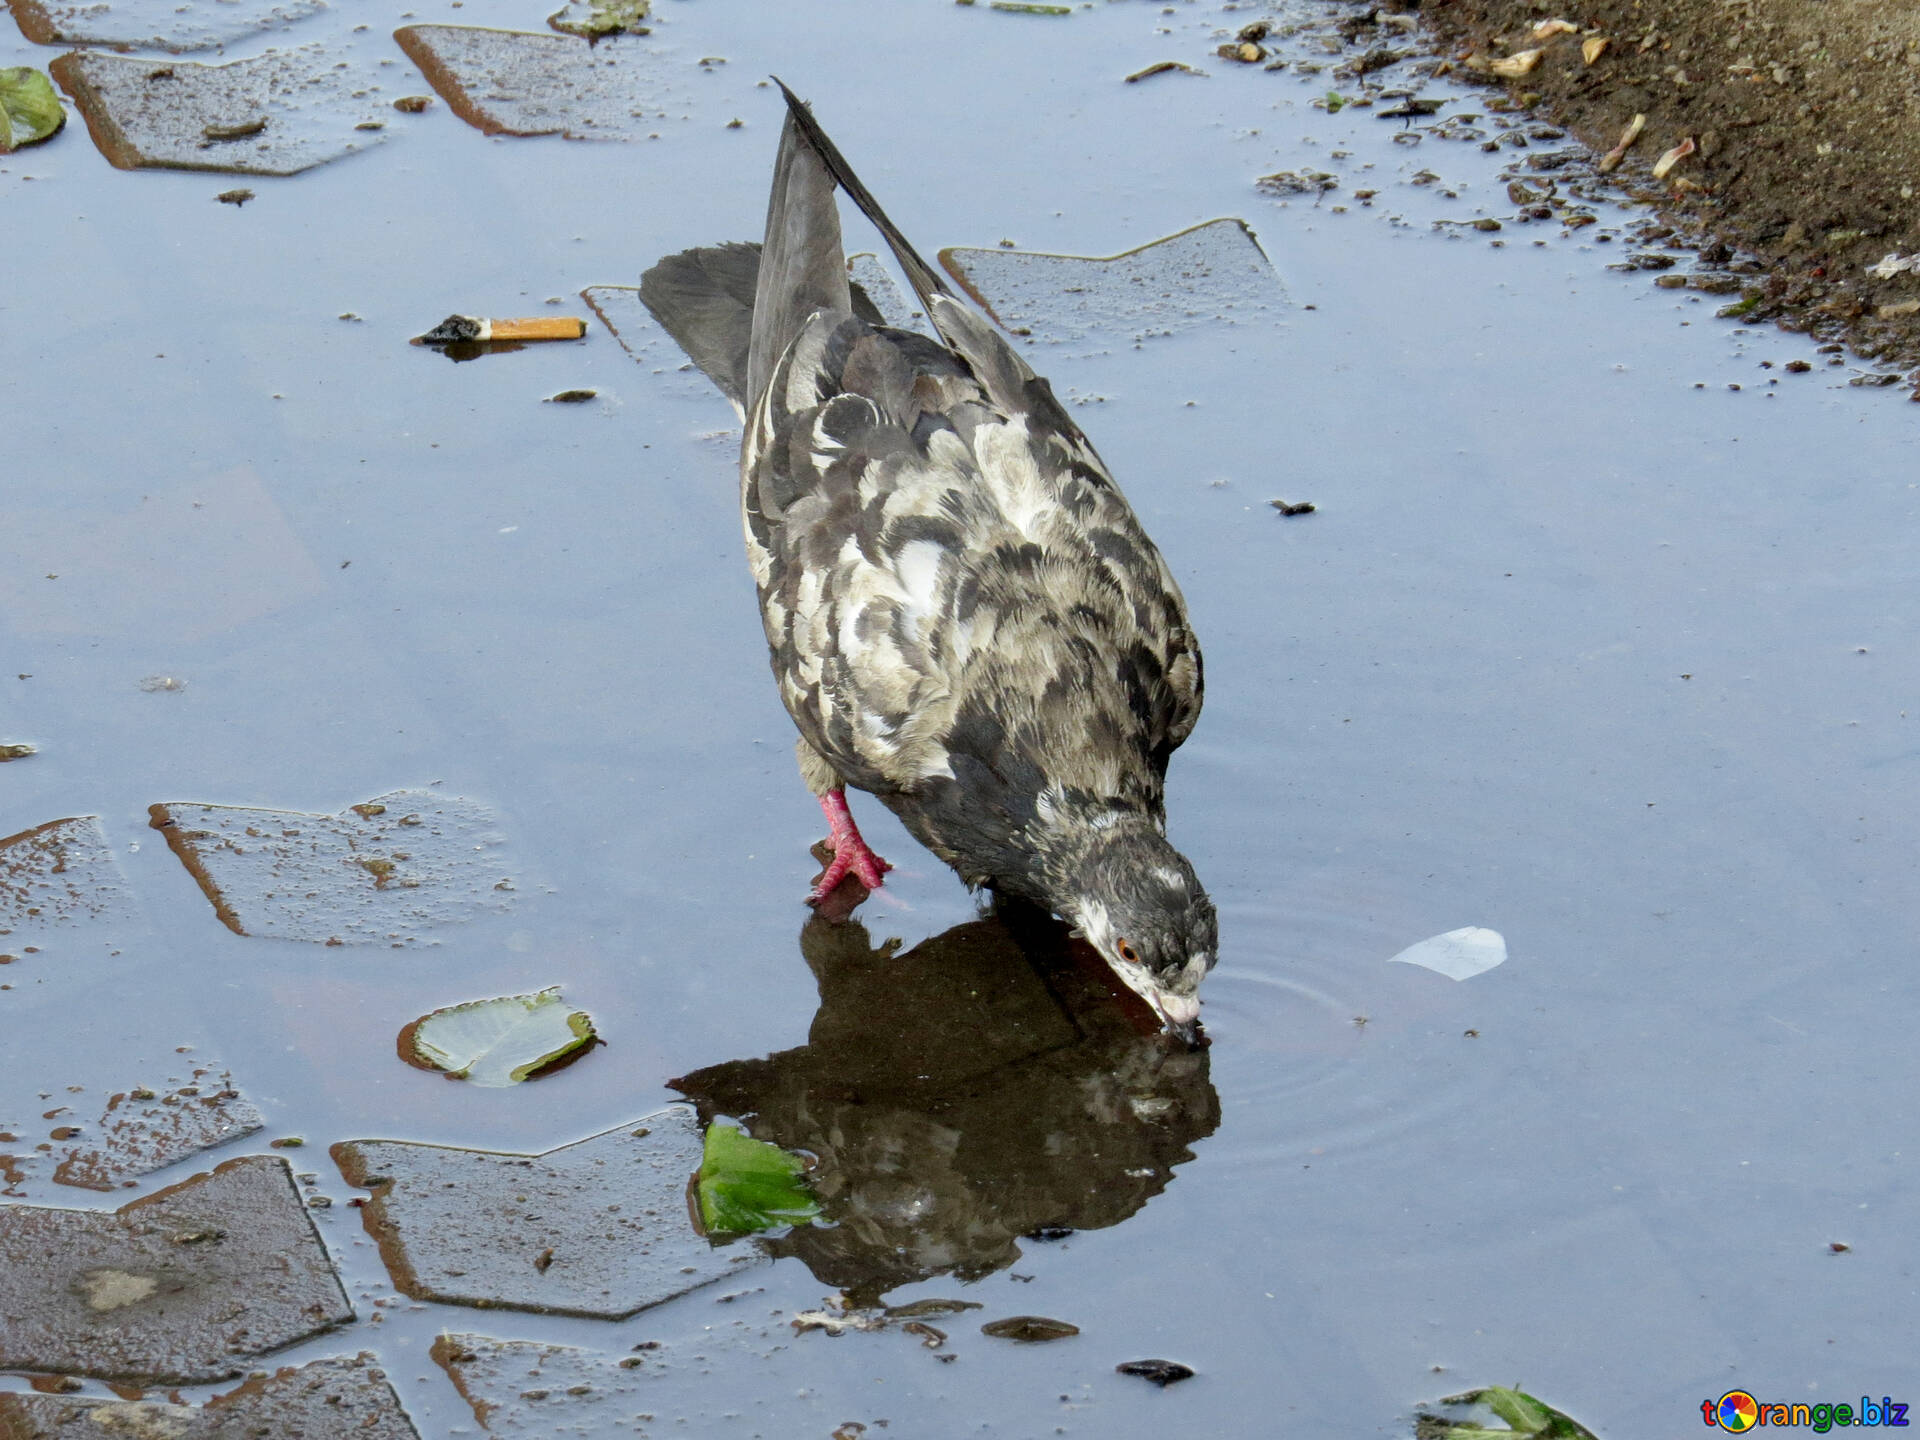 Bird pigeons image pigeon drinking water images bird № 53400   ~ free pics on cc-by license